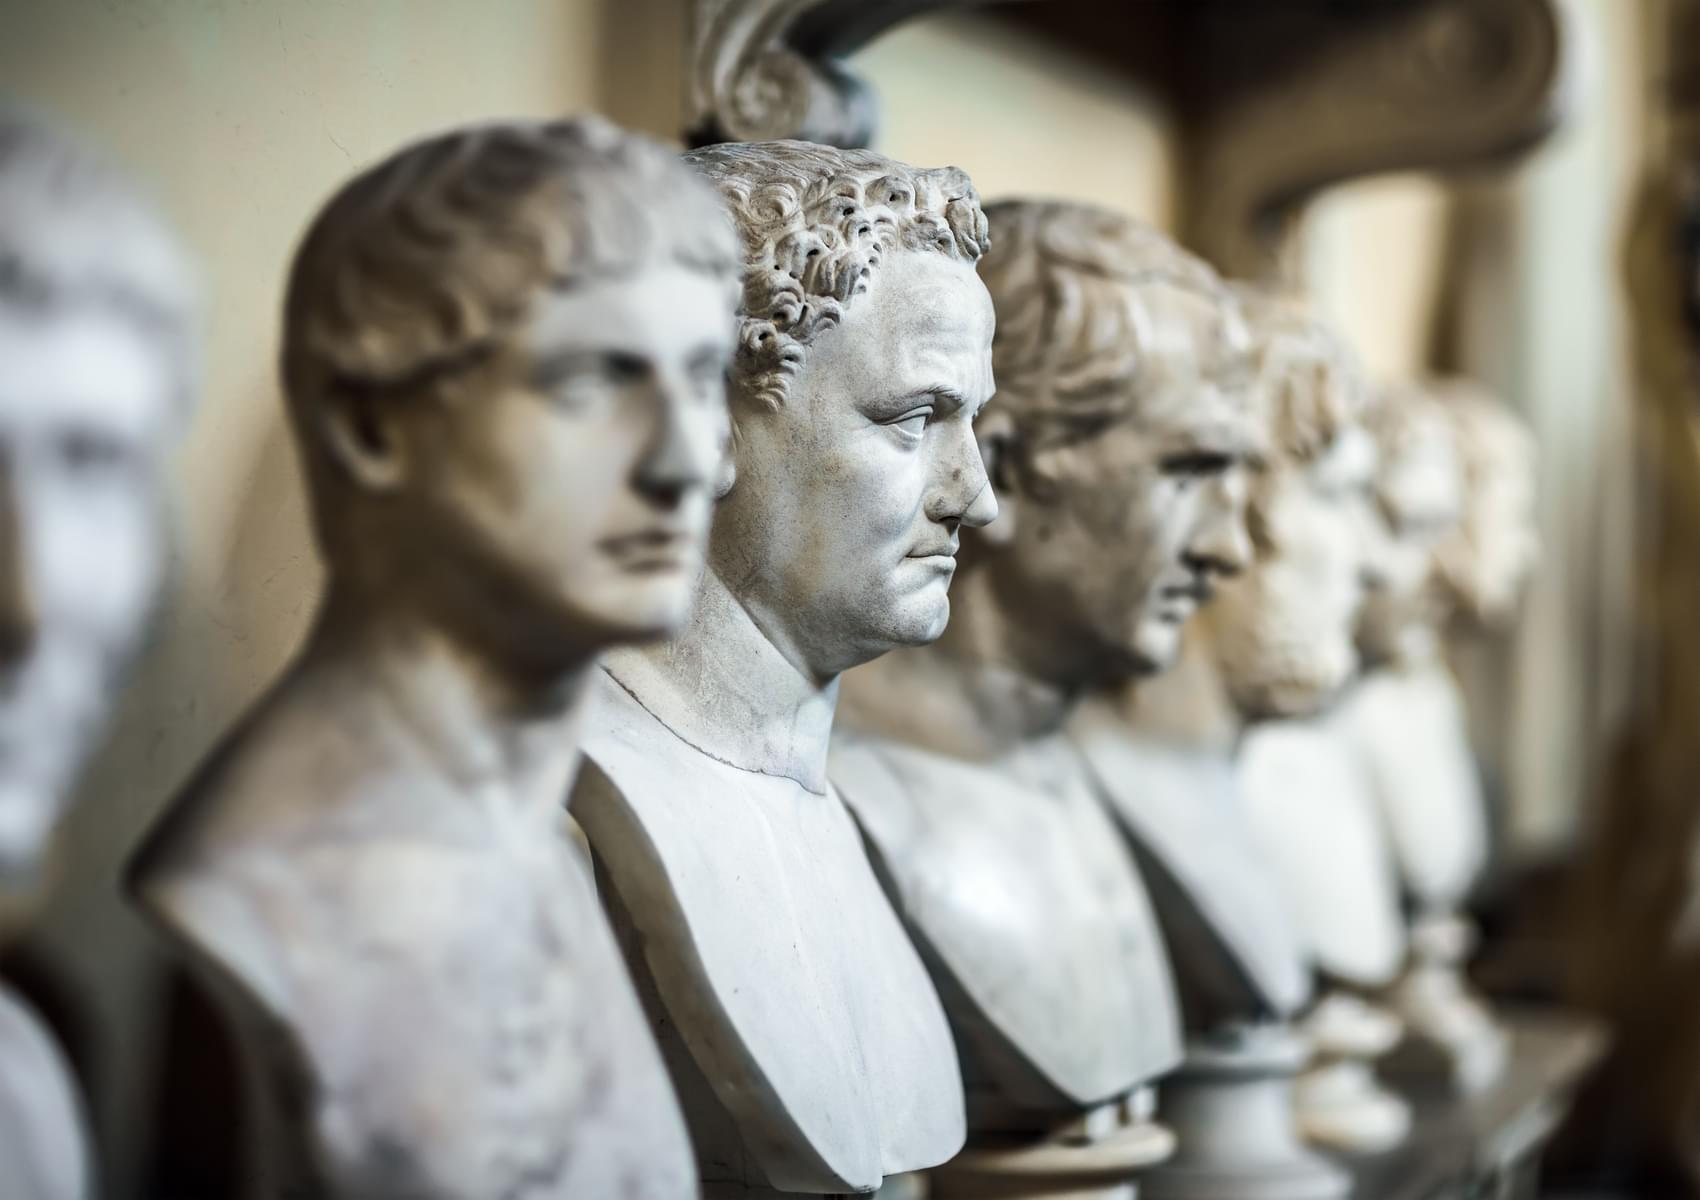 Gallery of Statues and Hall of Busts